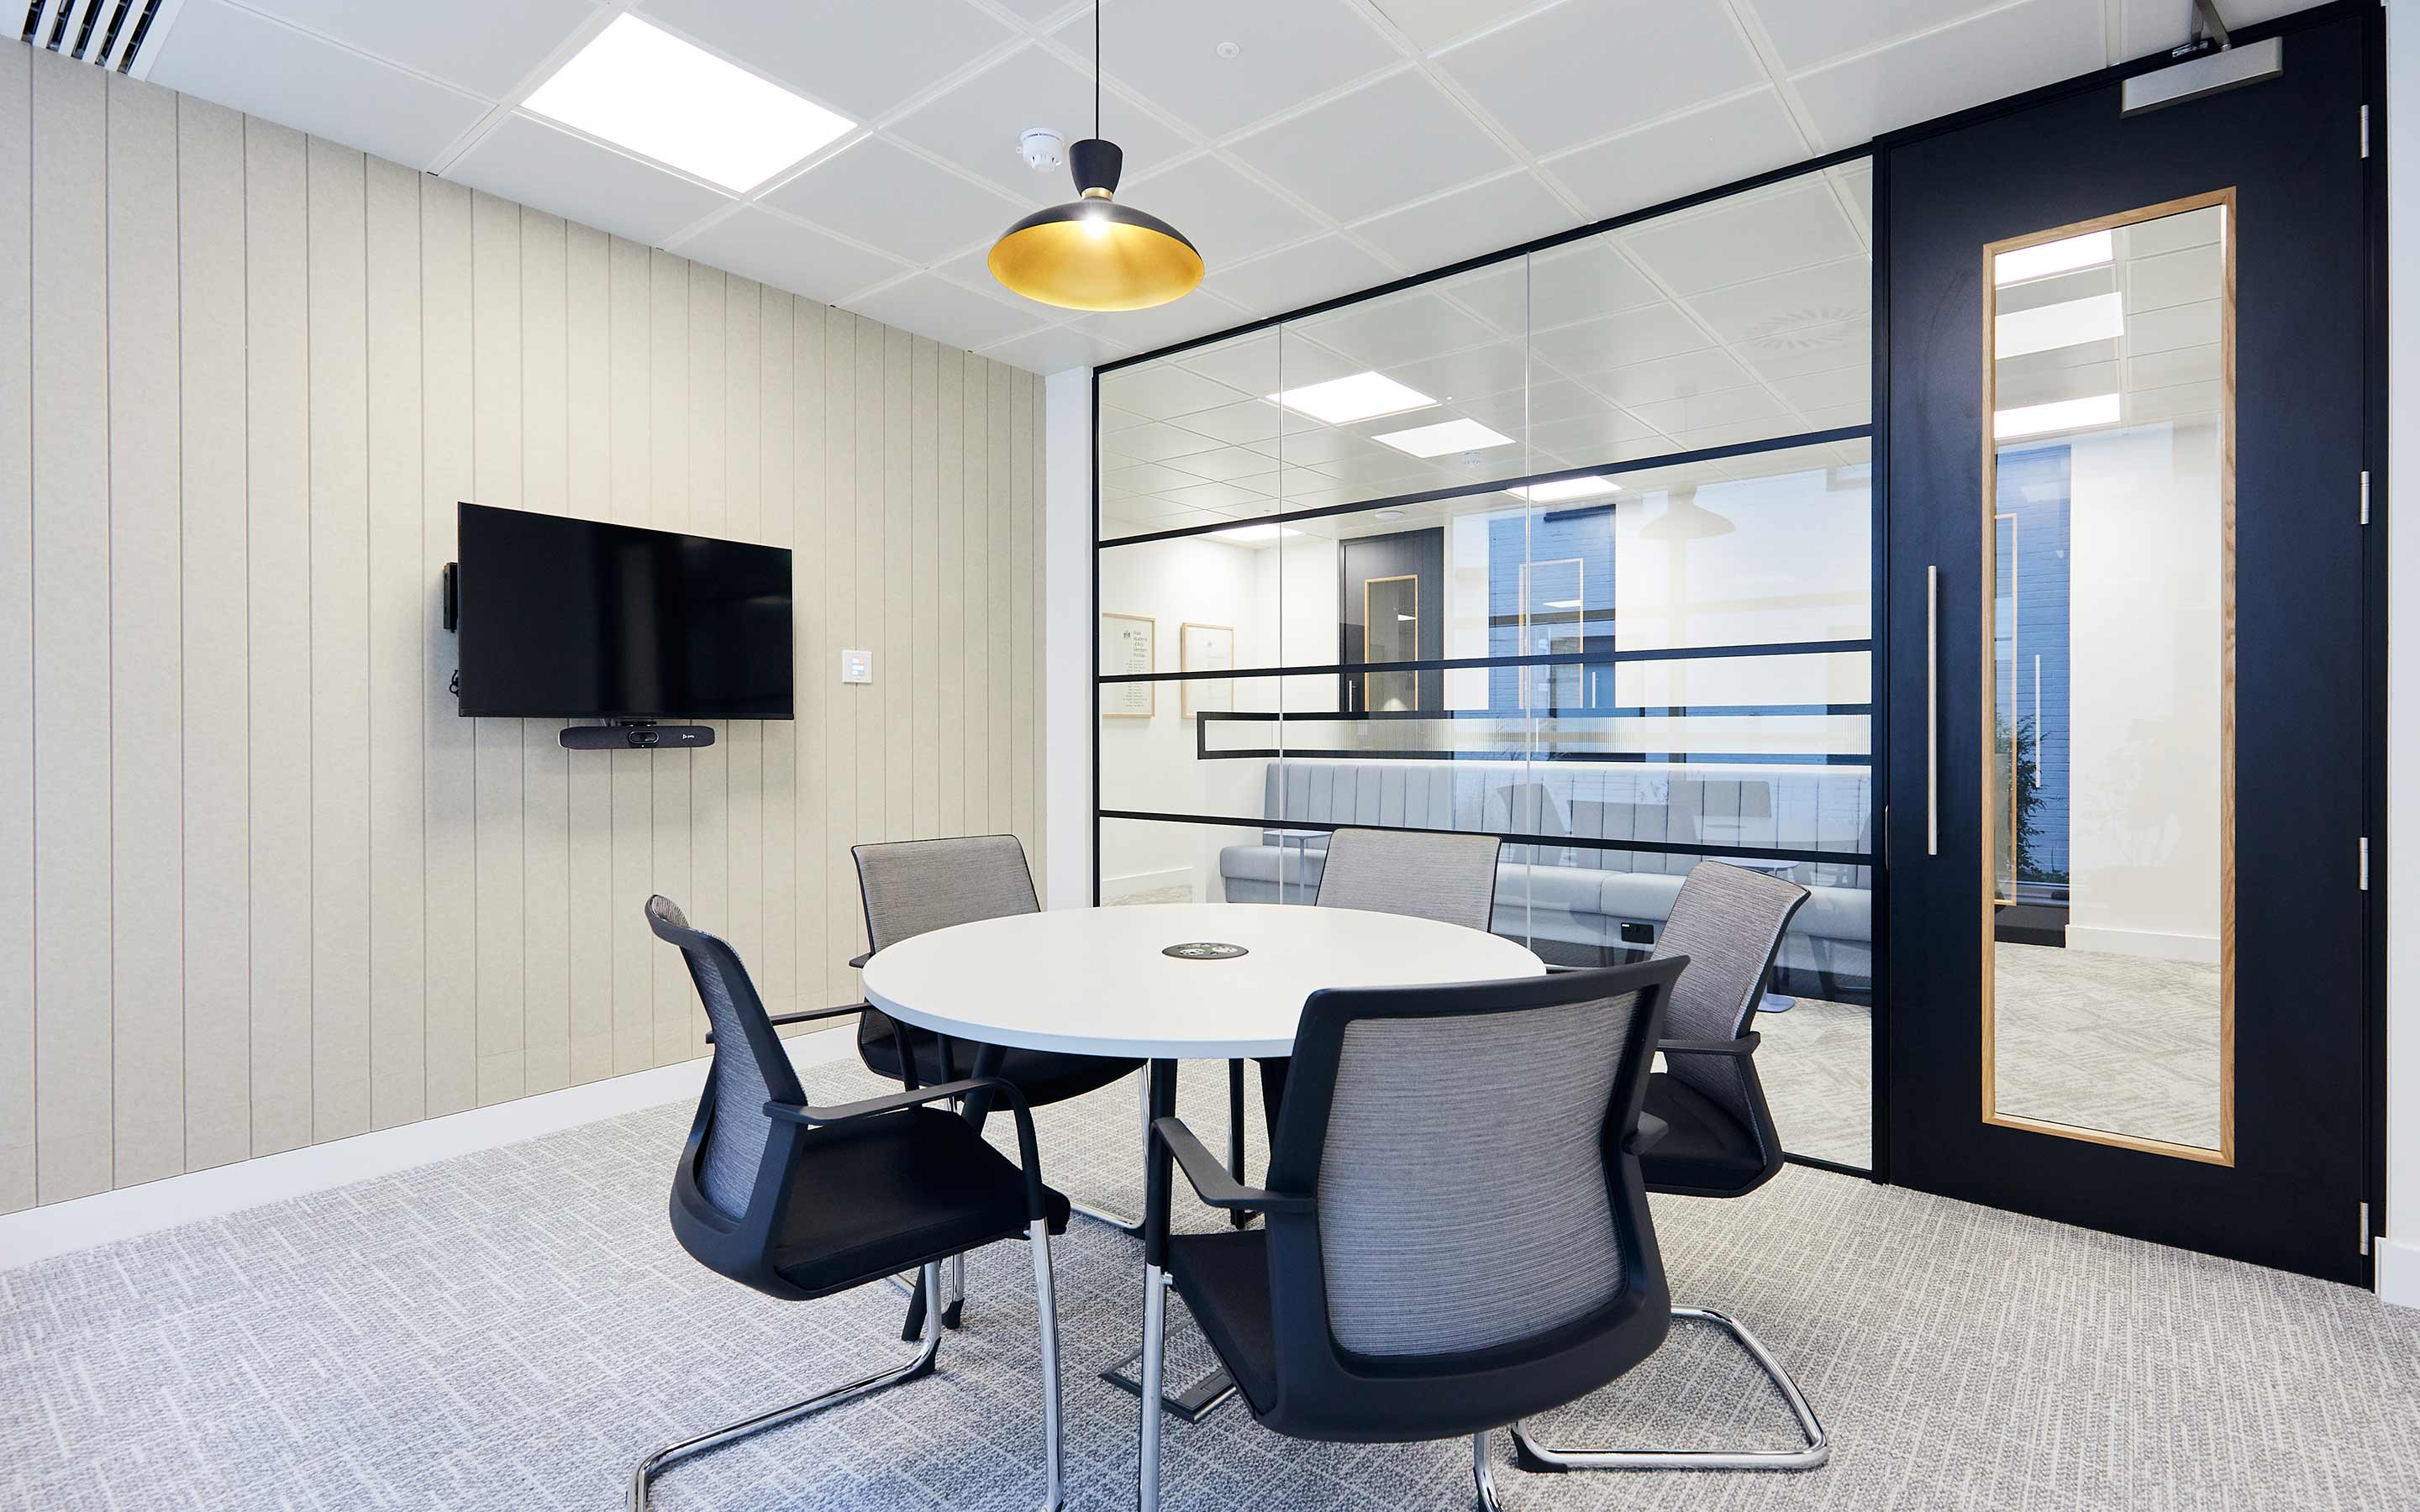 A meeting room in a modern office, with chairs and a round table, and glass walls